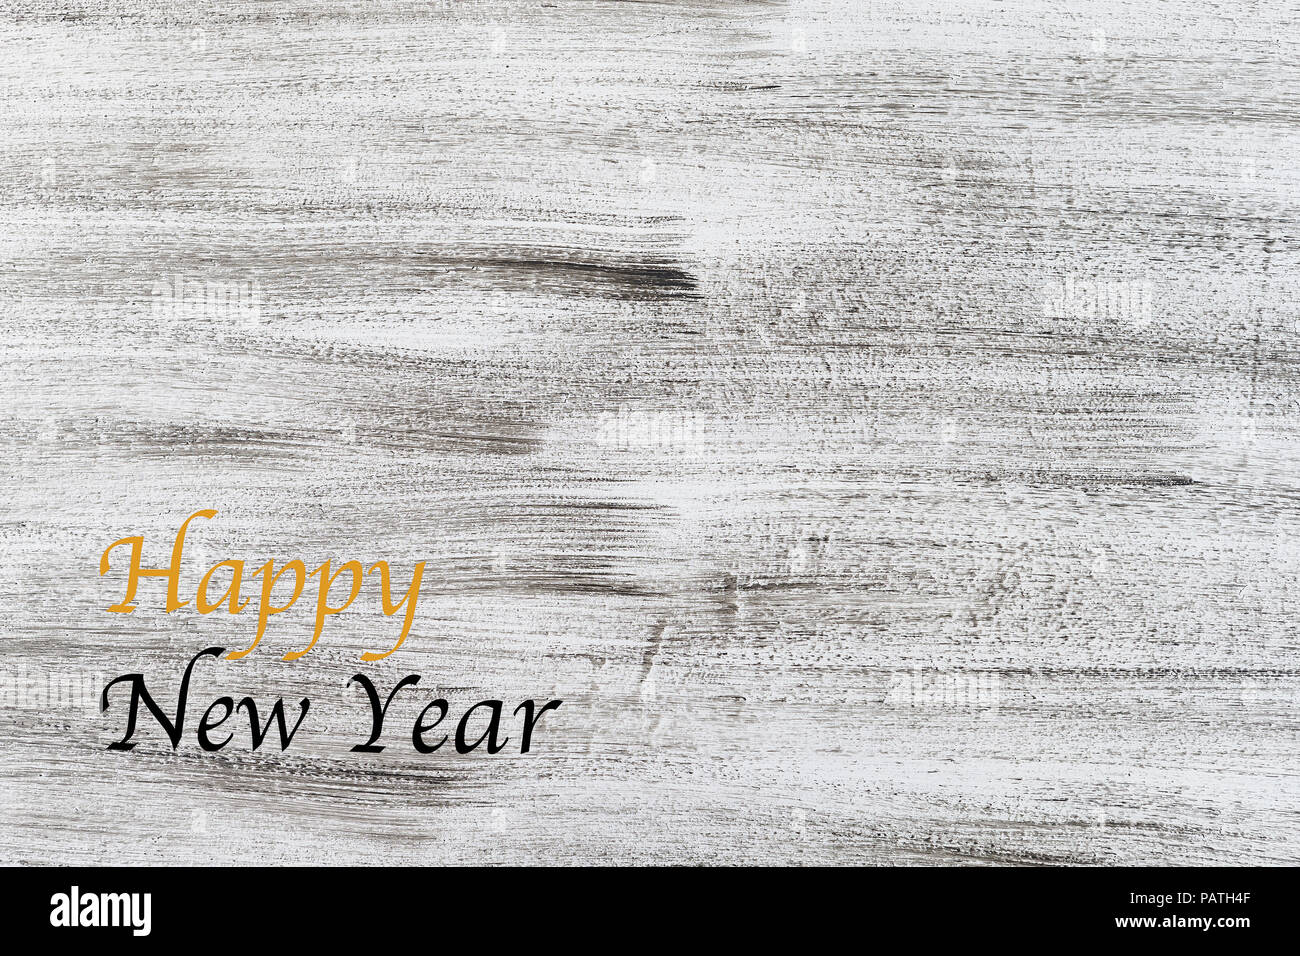 happy new year written in gold and black on antique rustic white grey wooden painted background copy space Stock Photo